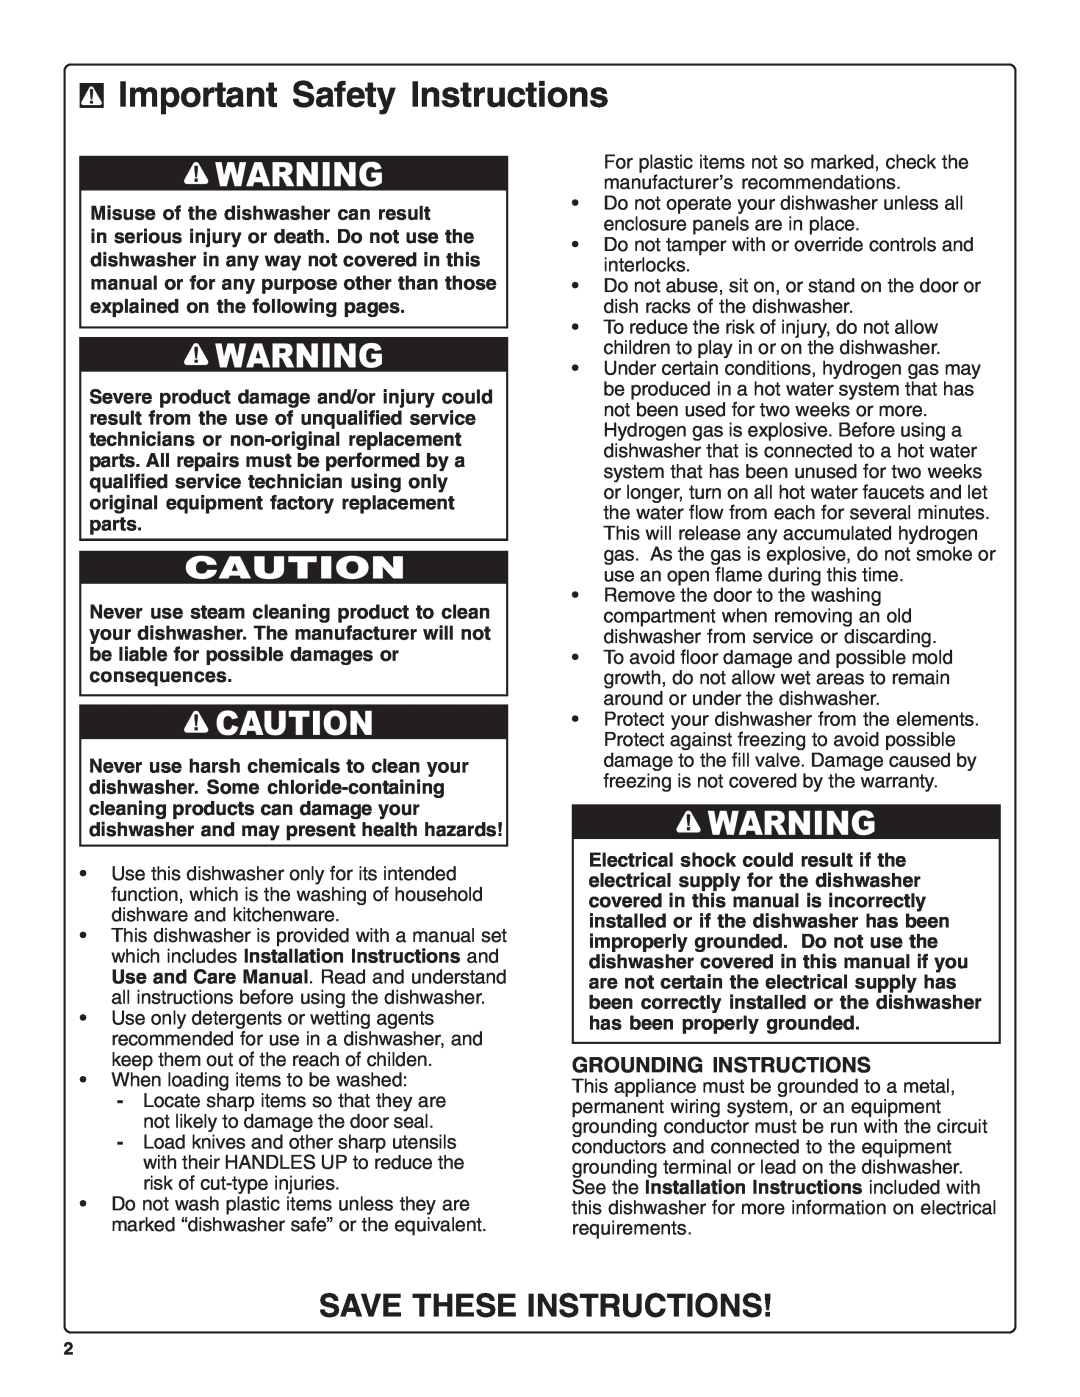 Bosch Appliances sHe43C Important Safety Instructions, Save These Instructions, Grounding Instructions 